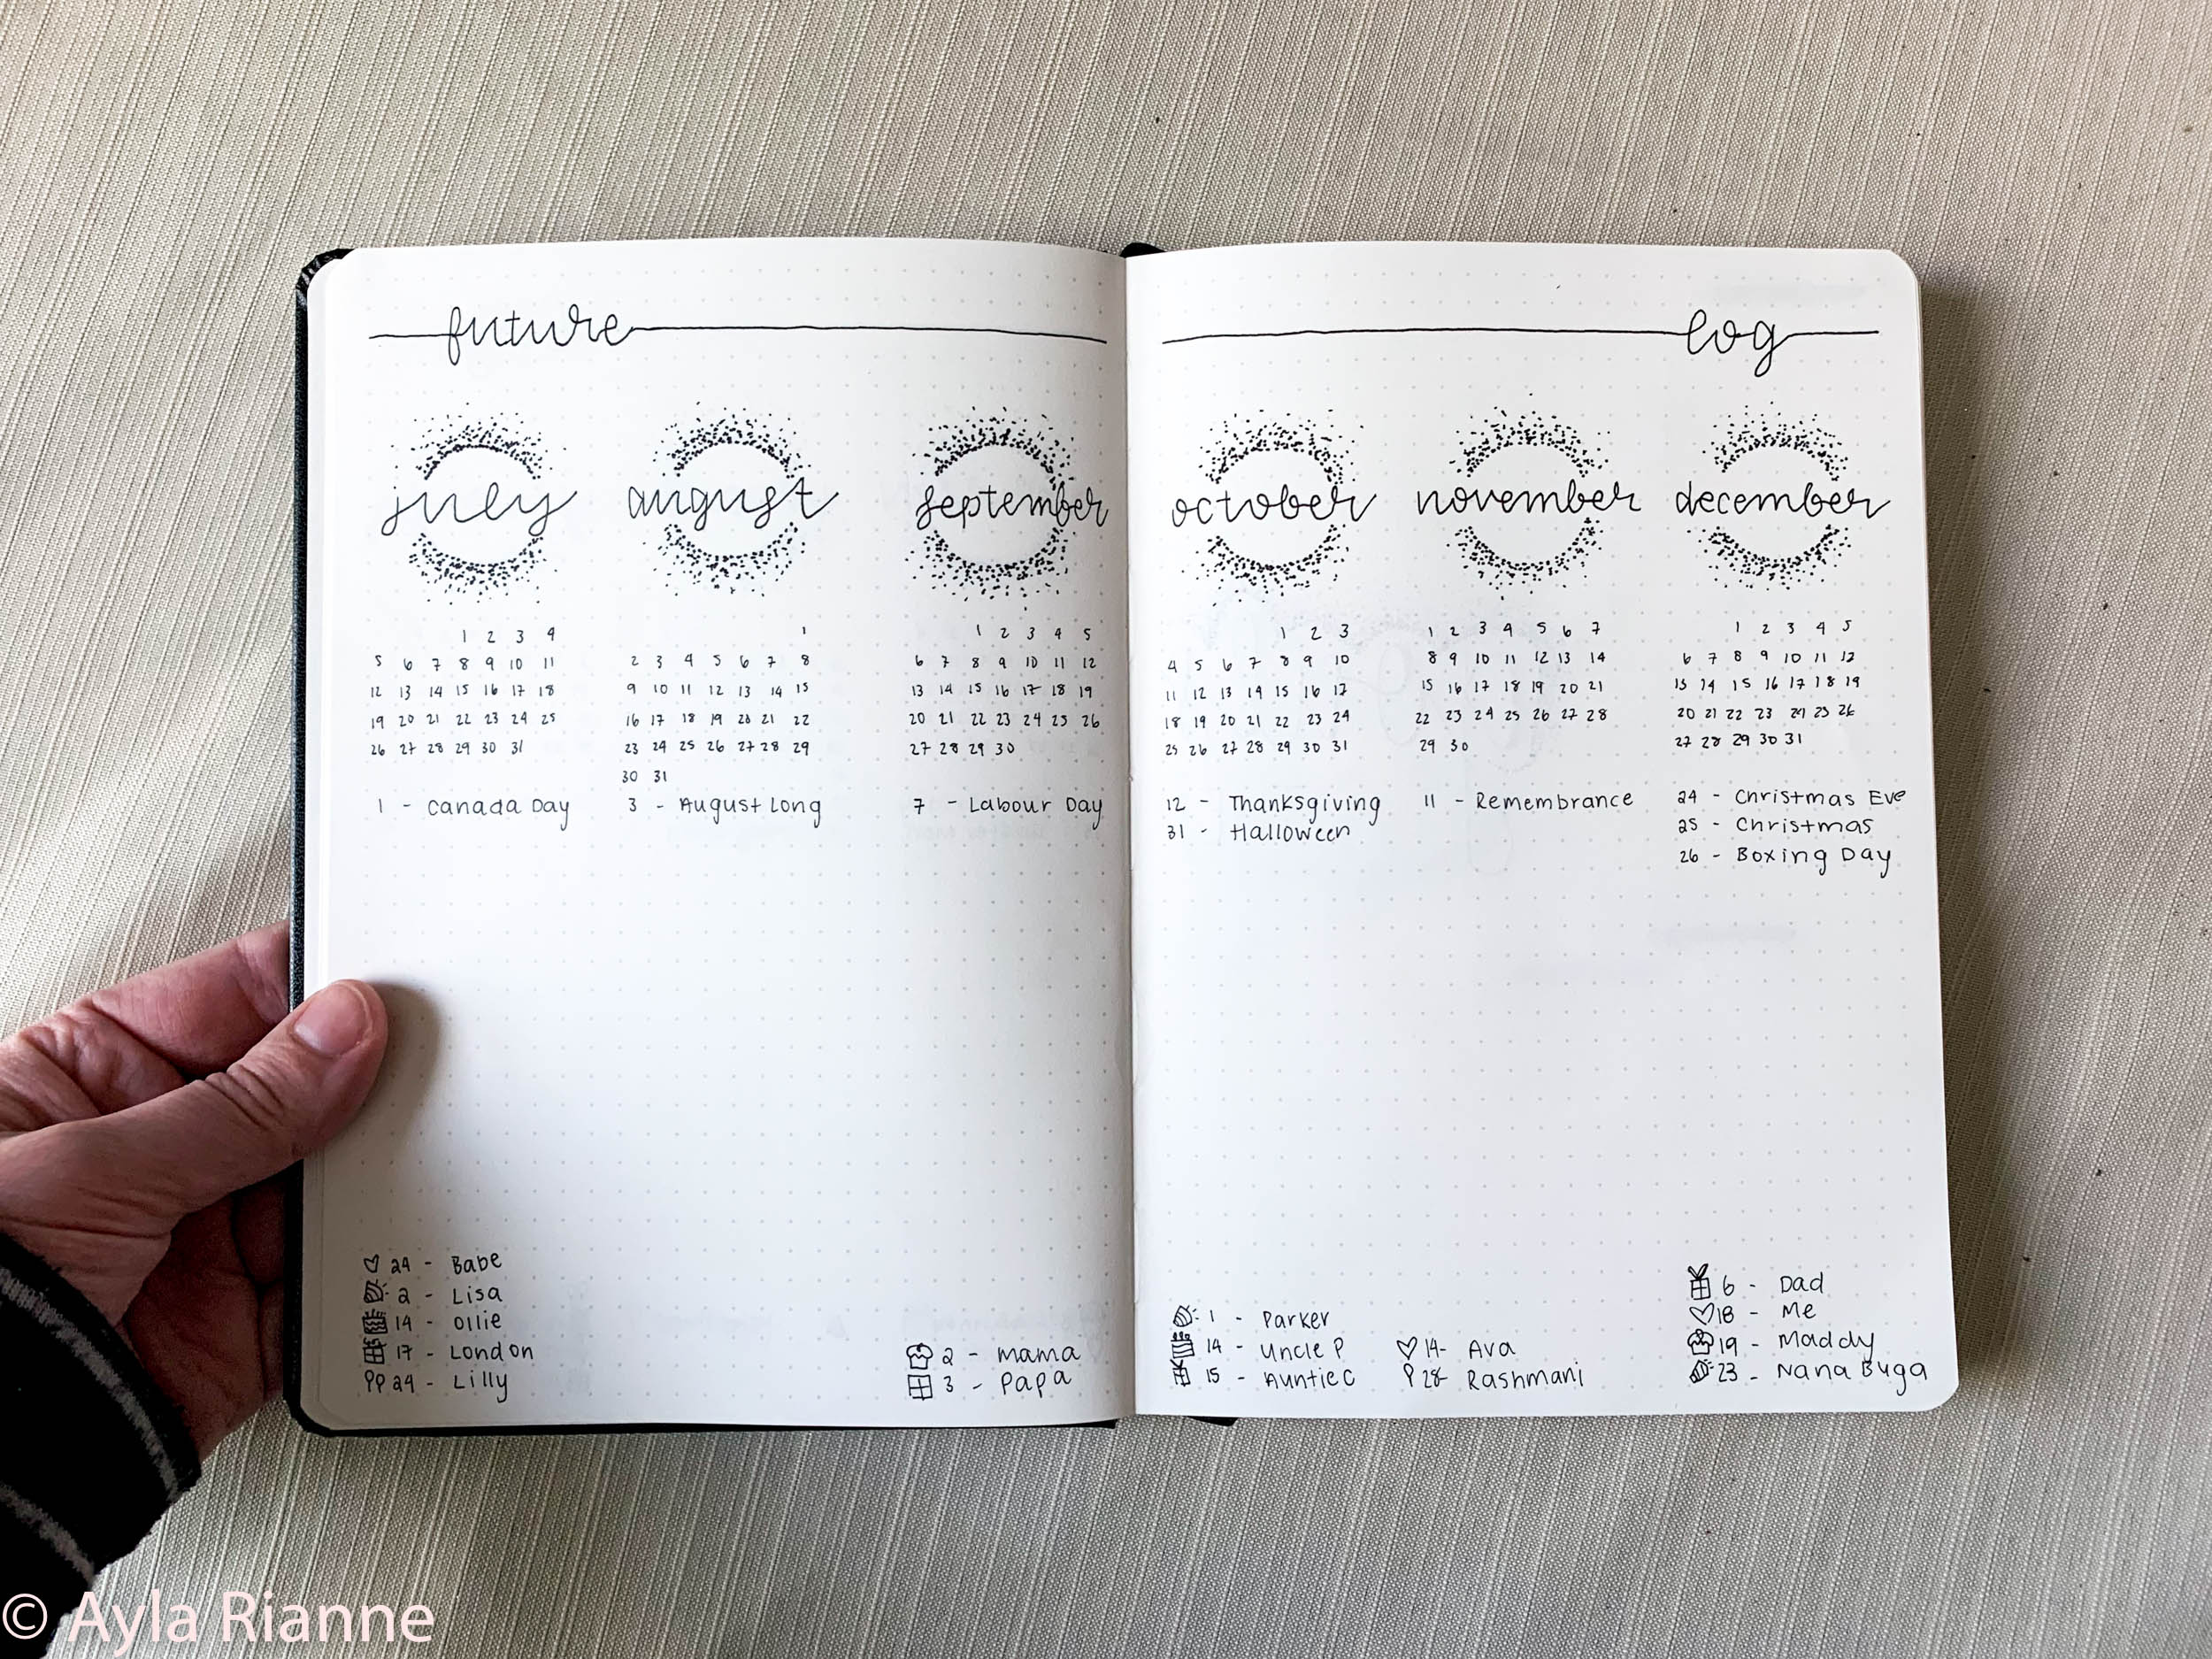 Future Log 2020 and Birthday Tracker Bullet Journal 2020